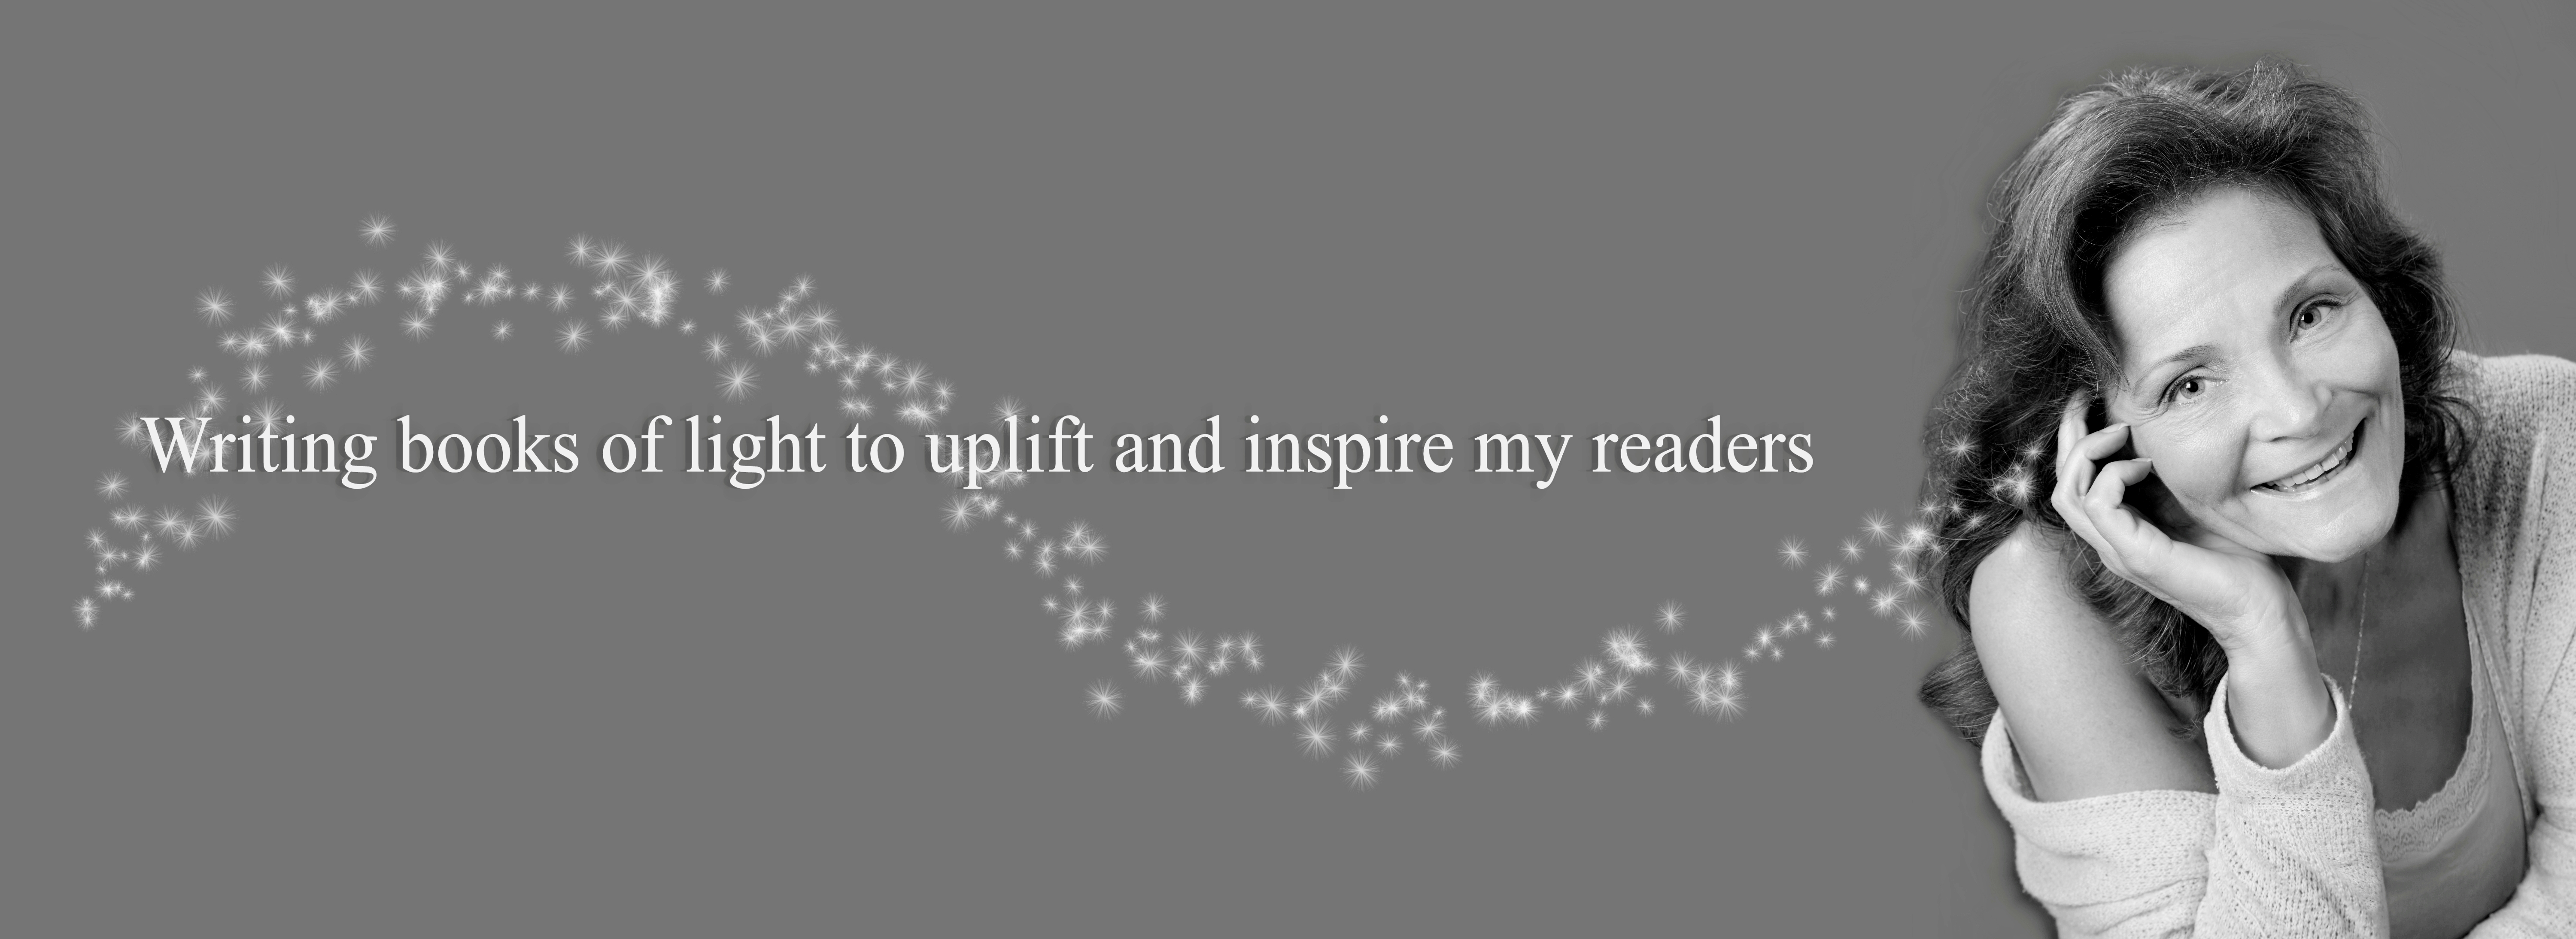 Writing books of light to uplift and inspire my readers